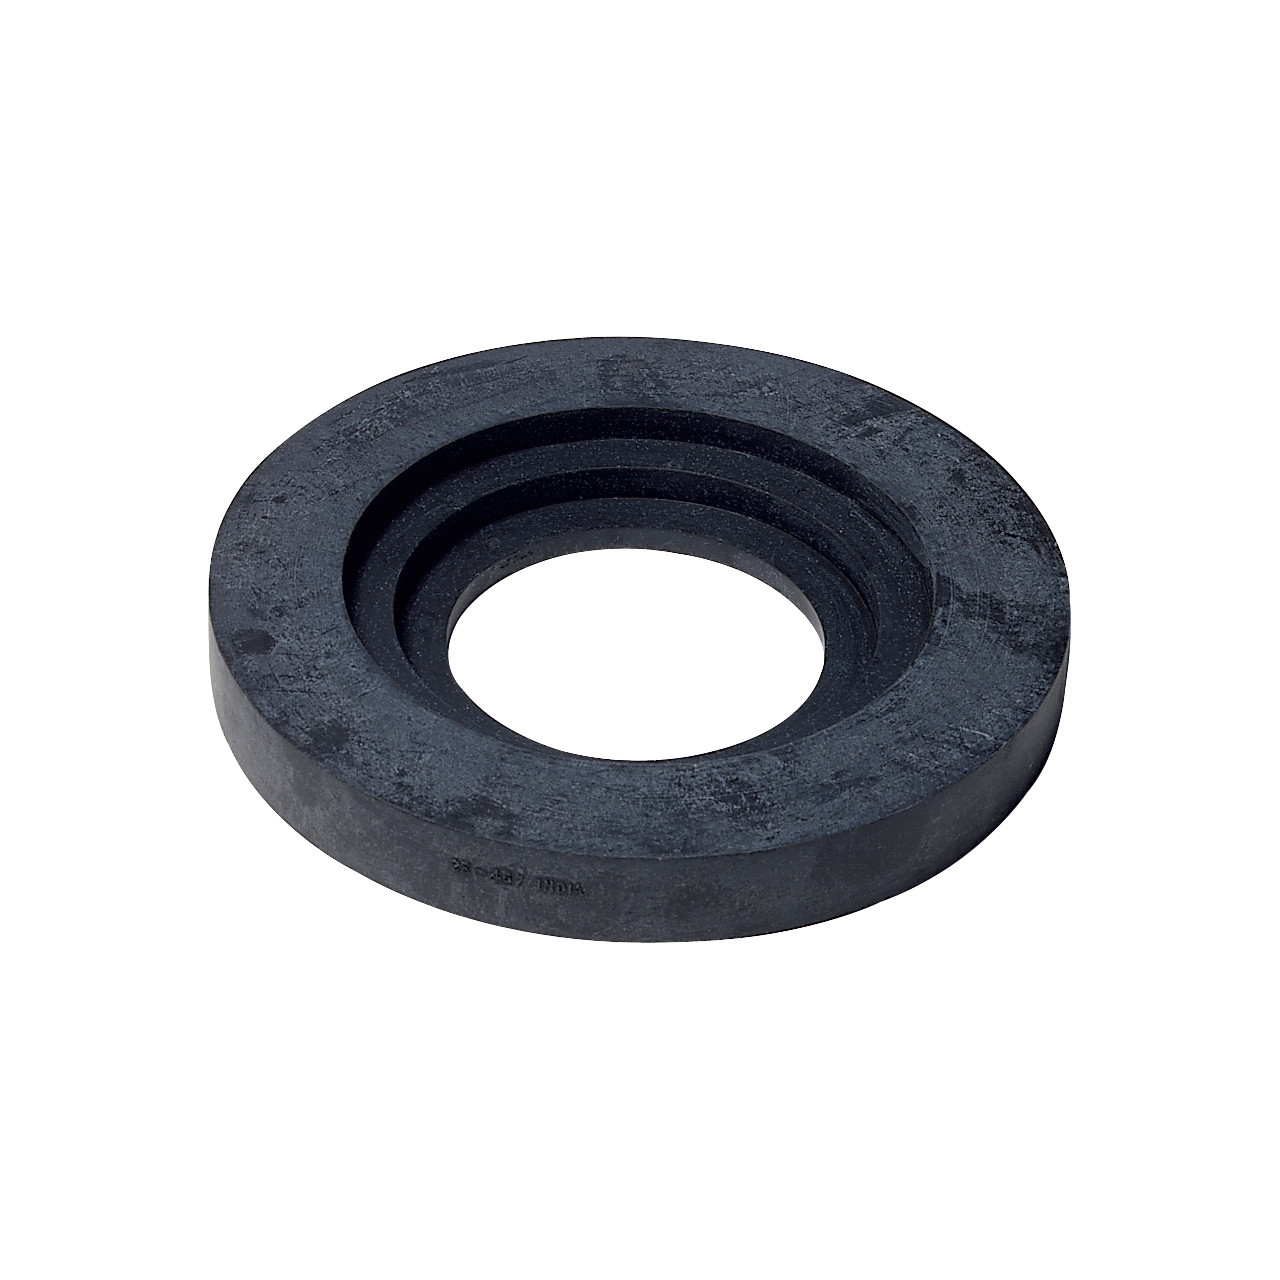 Pads for Pitch Bowls & Engravers Blocks - Rubber 8"